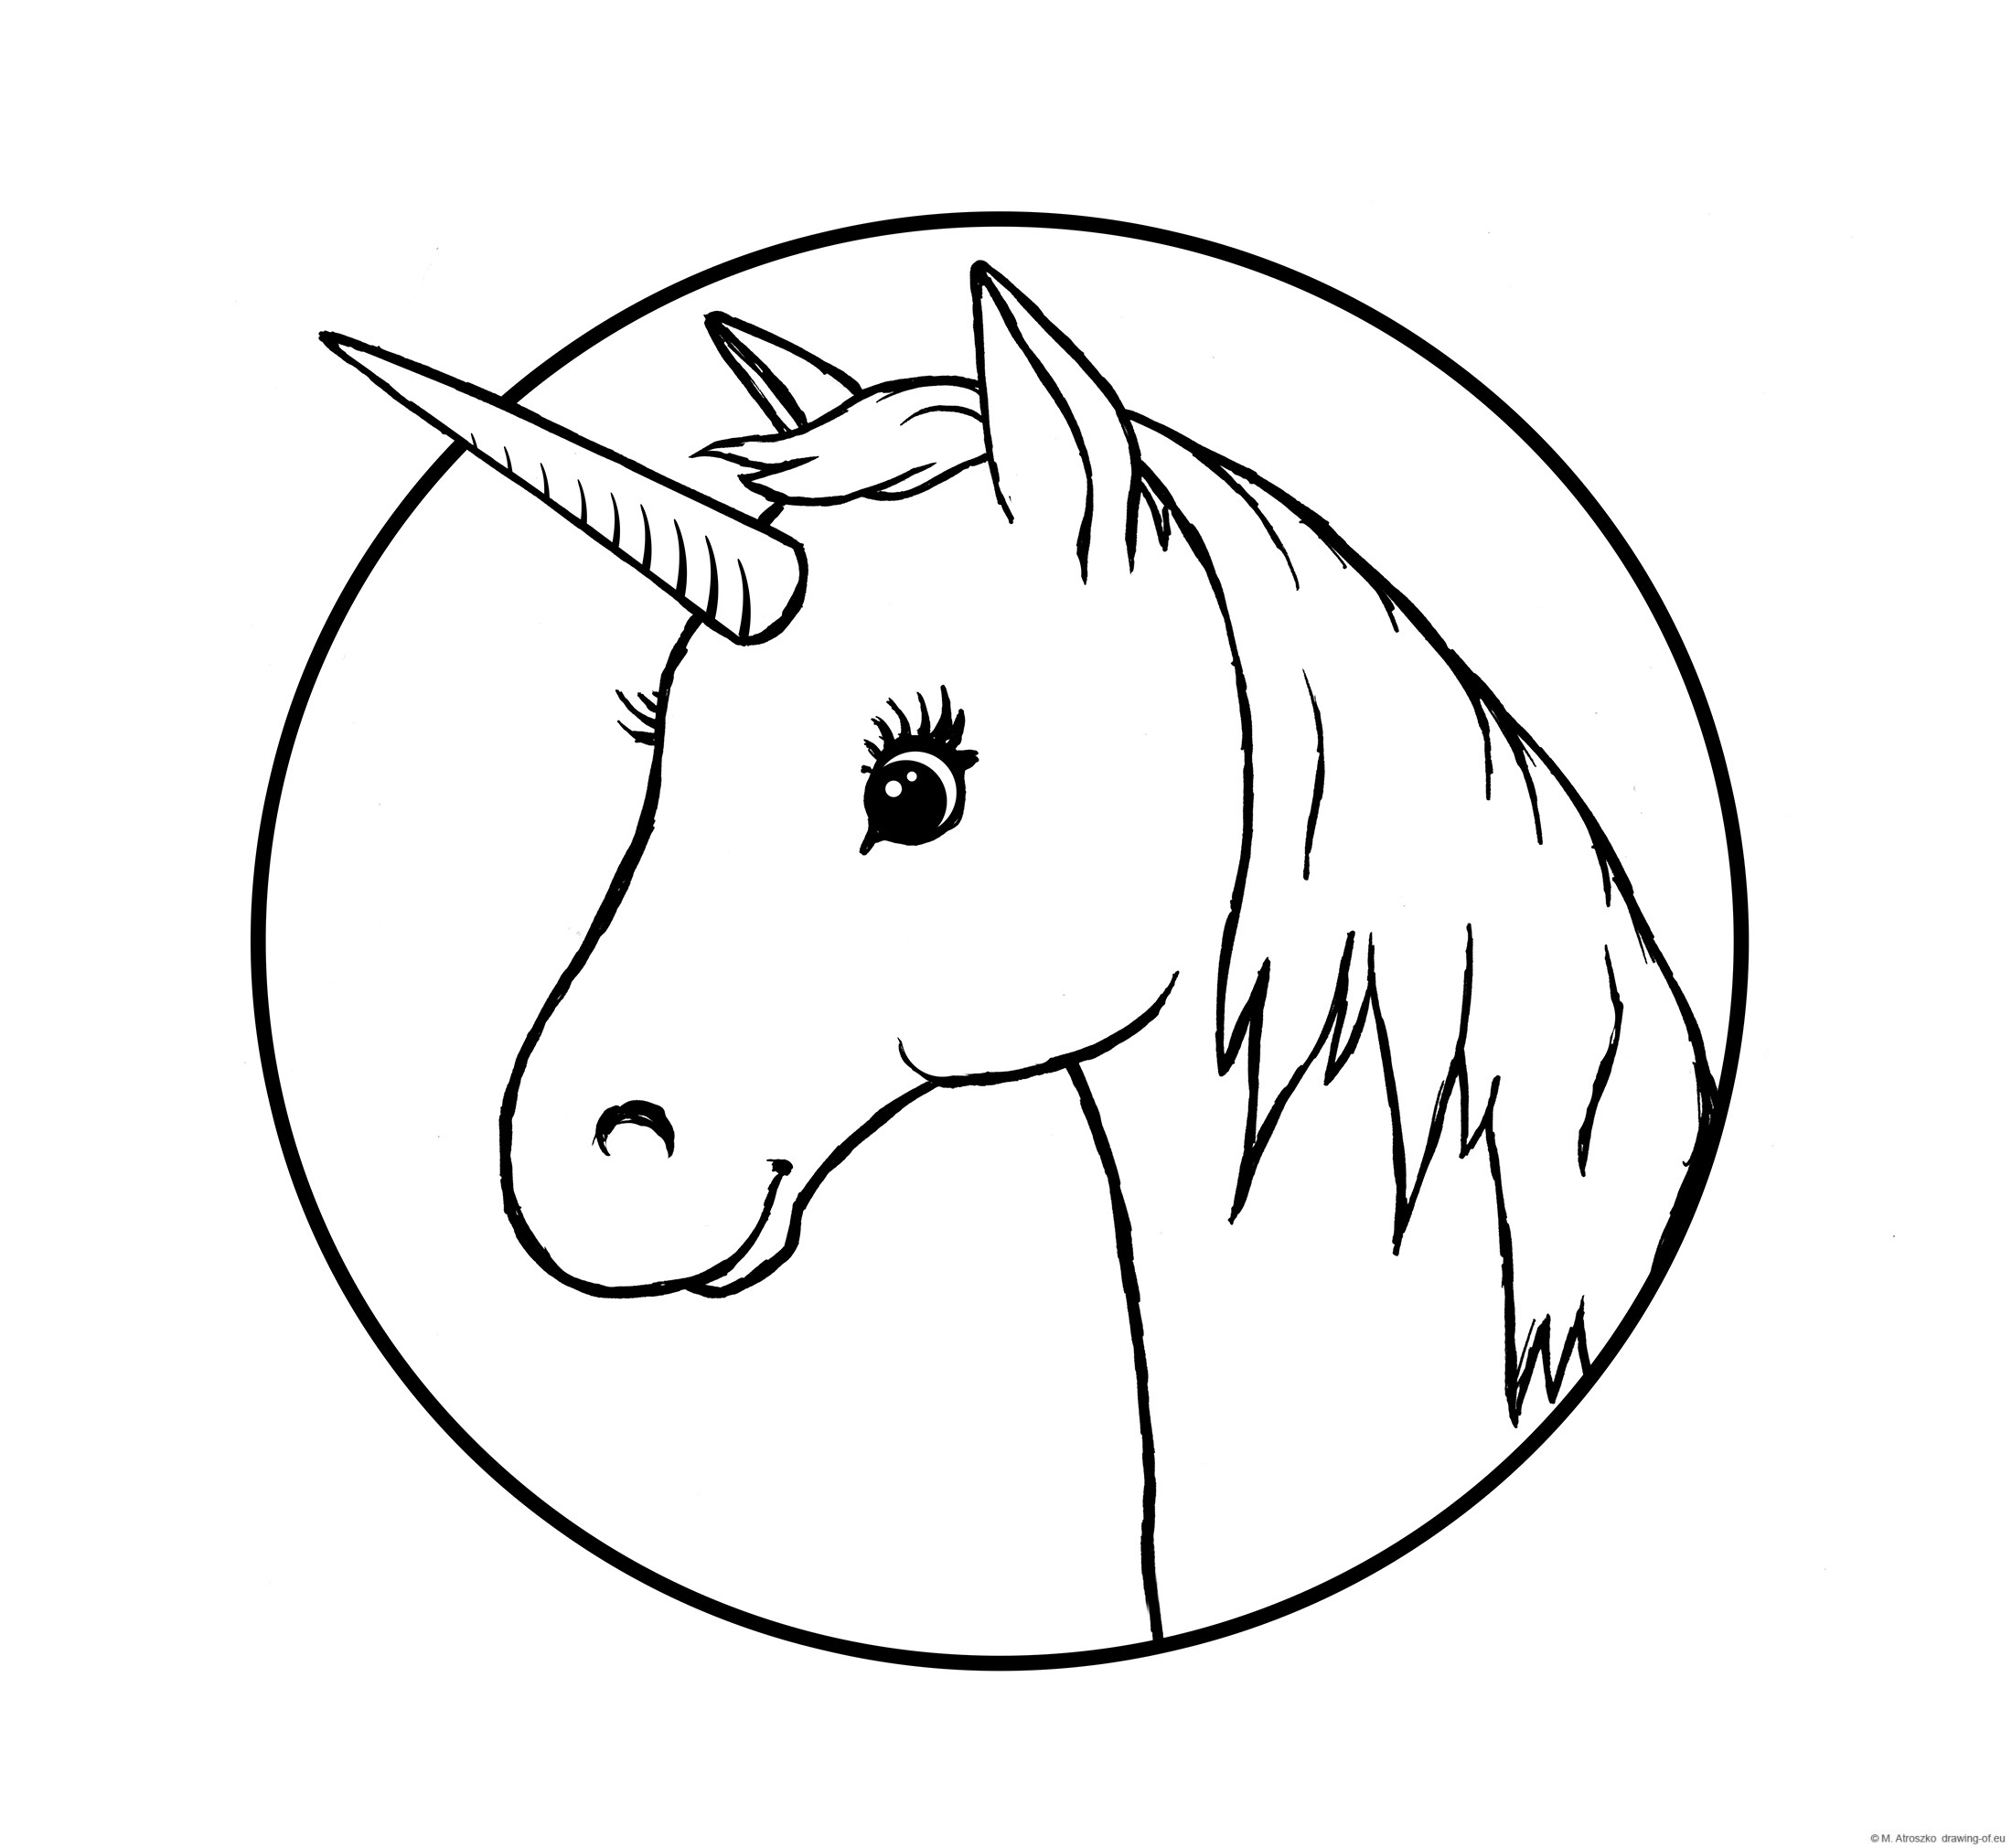 Unicorn - coloring page